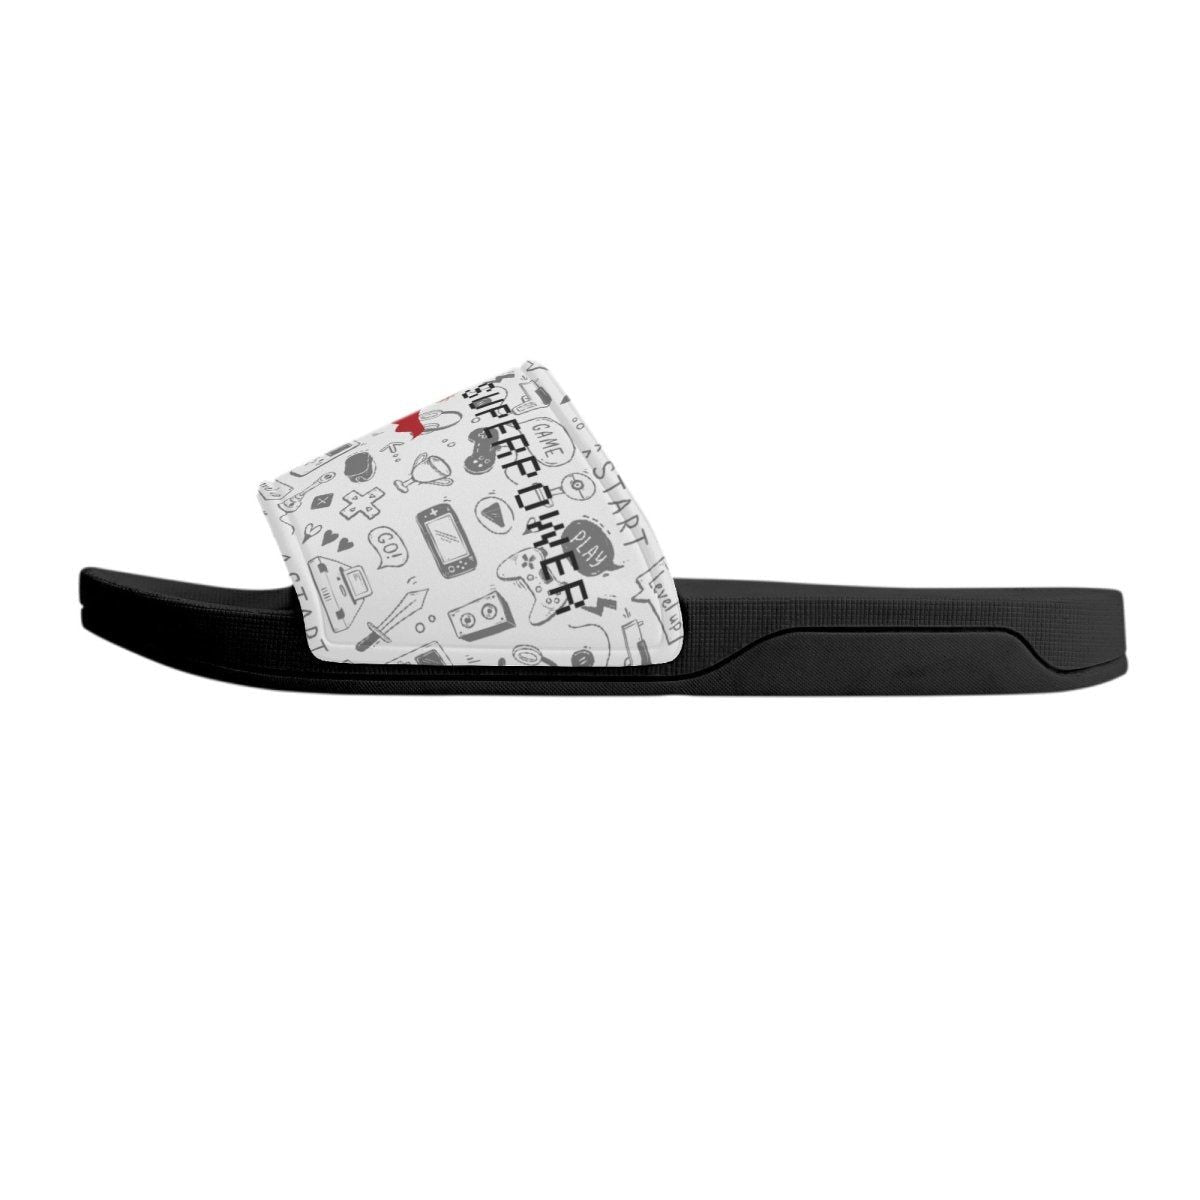 Power Up Your Style with Gaming Womens Slide Sandals - Perfect for Gaming Enthusiasts - Iron Phoenix GHG